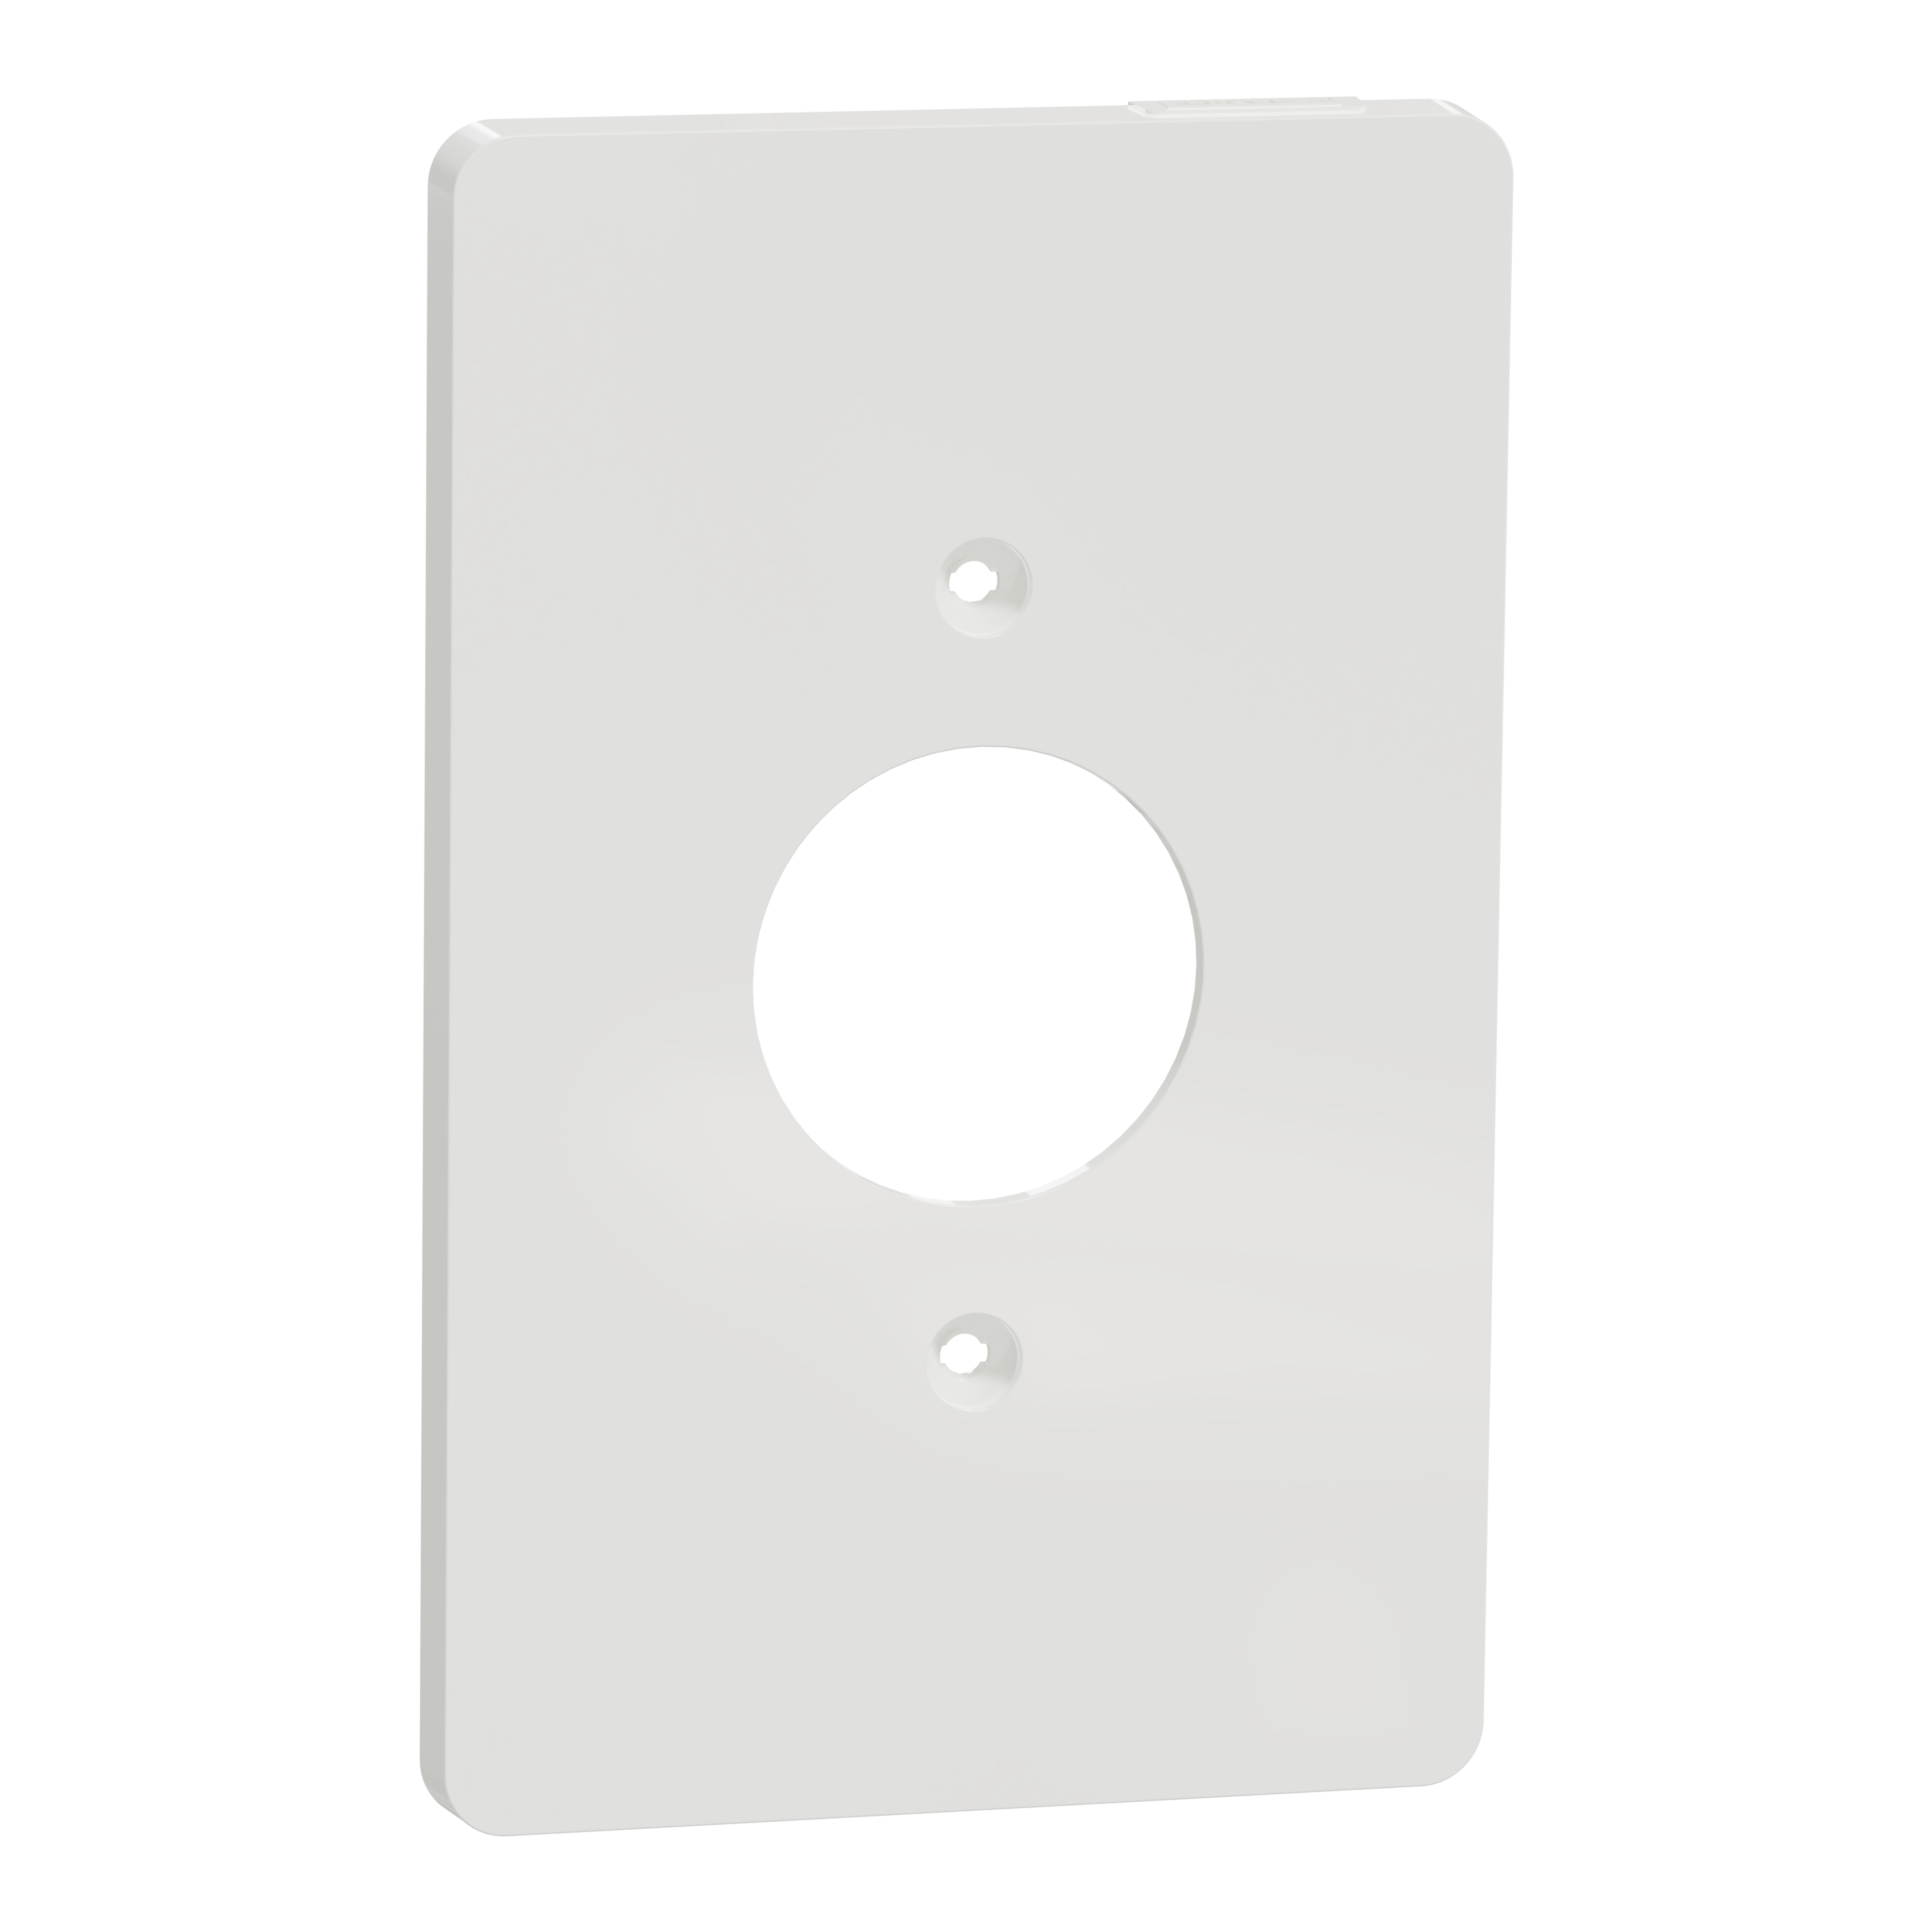 Cover frame, X Series, for socket-outlet, 1 gang, screw fixed, mid sized plus, white, matte finish